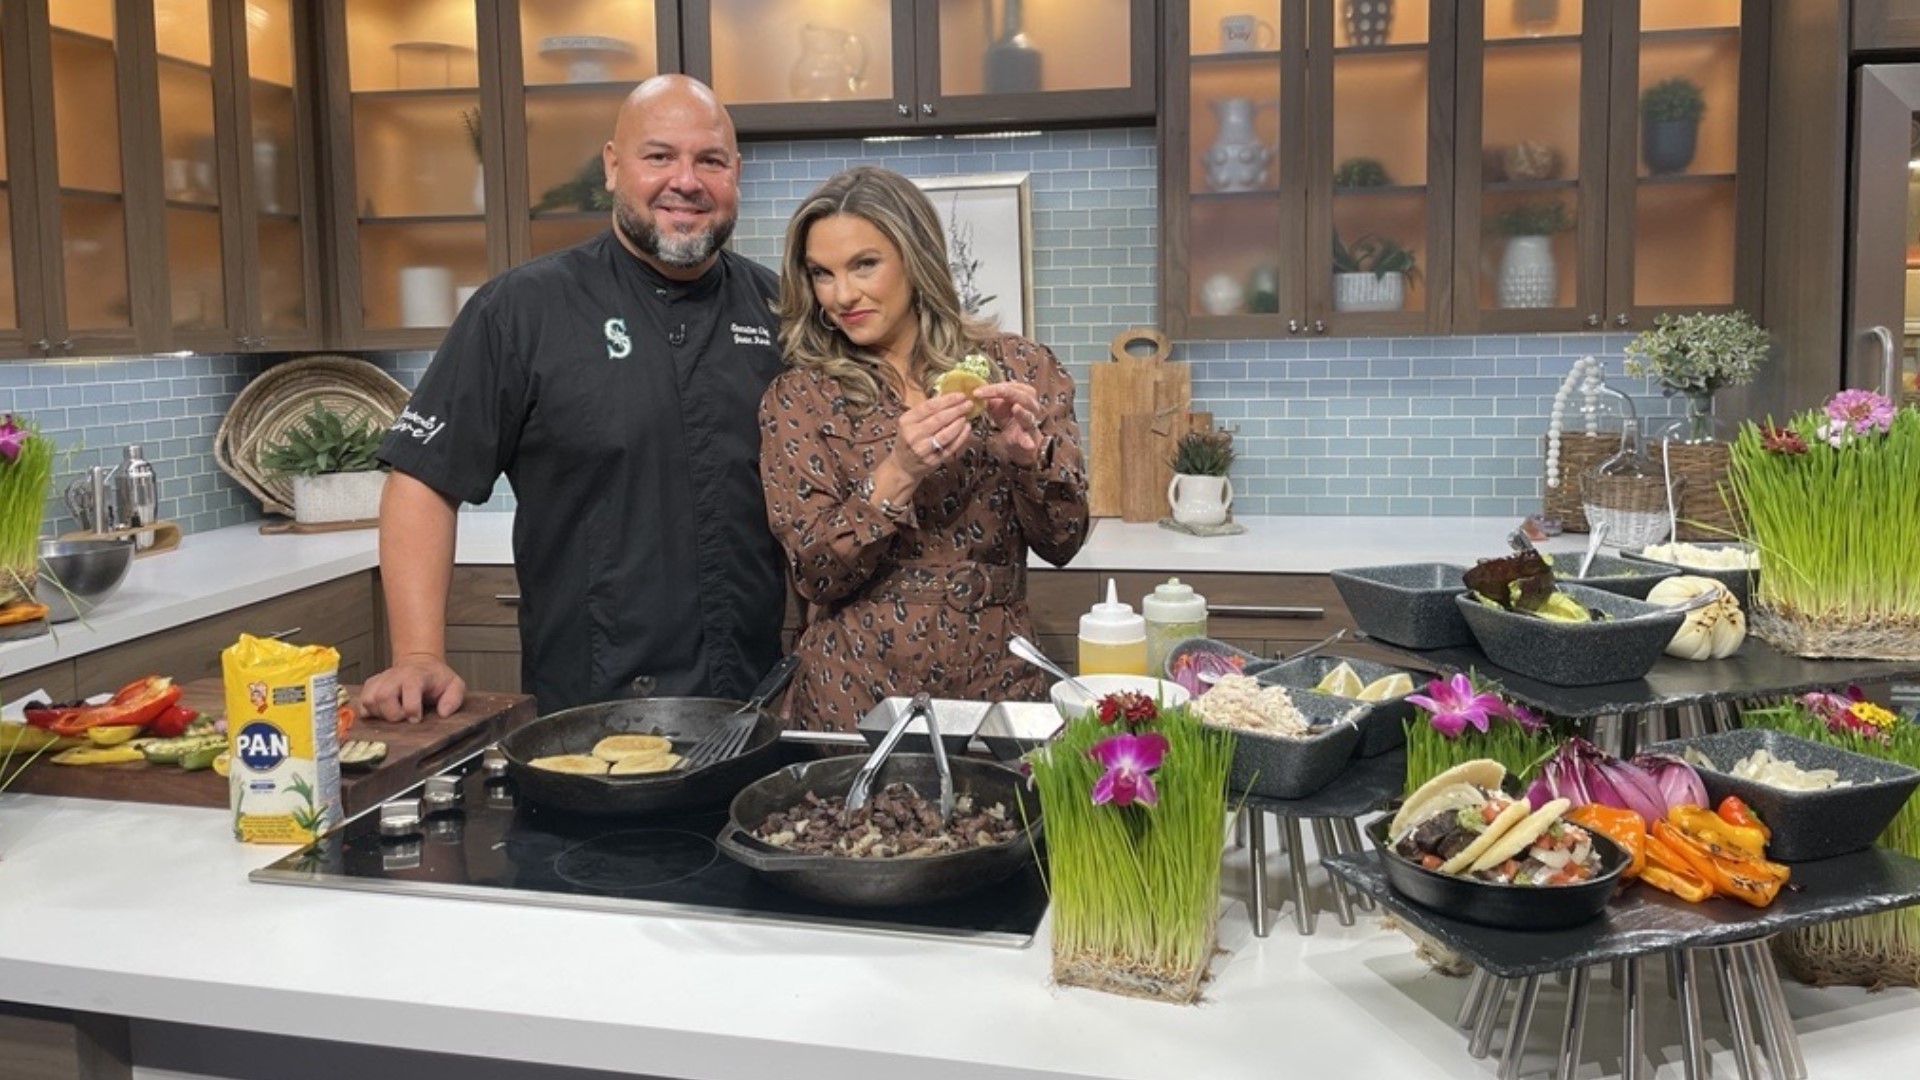 T-Mobile Park’s Executive Chef Javier Rosa serves diverse dishes like Arepas to honor both his and players' heritage. #newdaynw